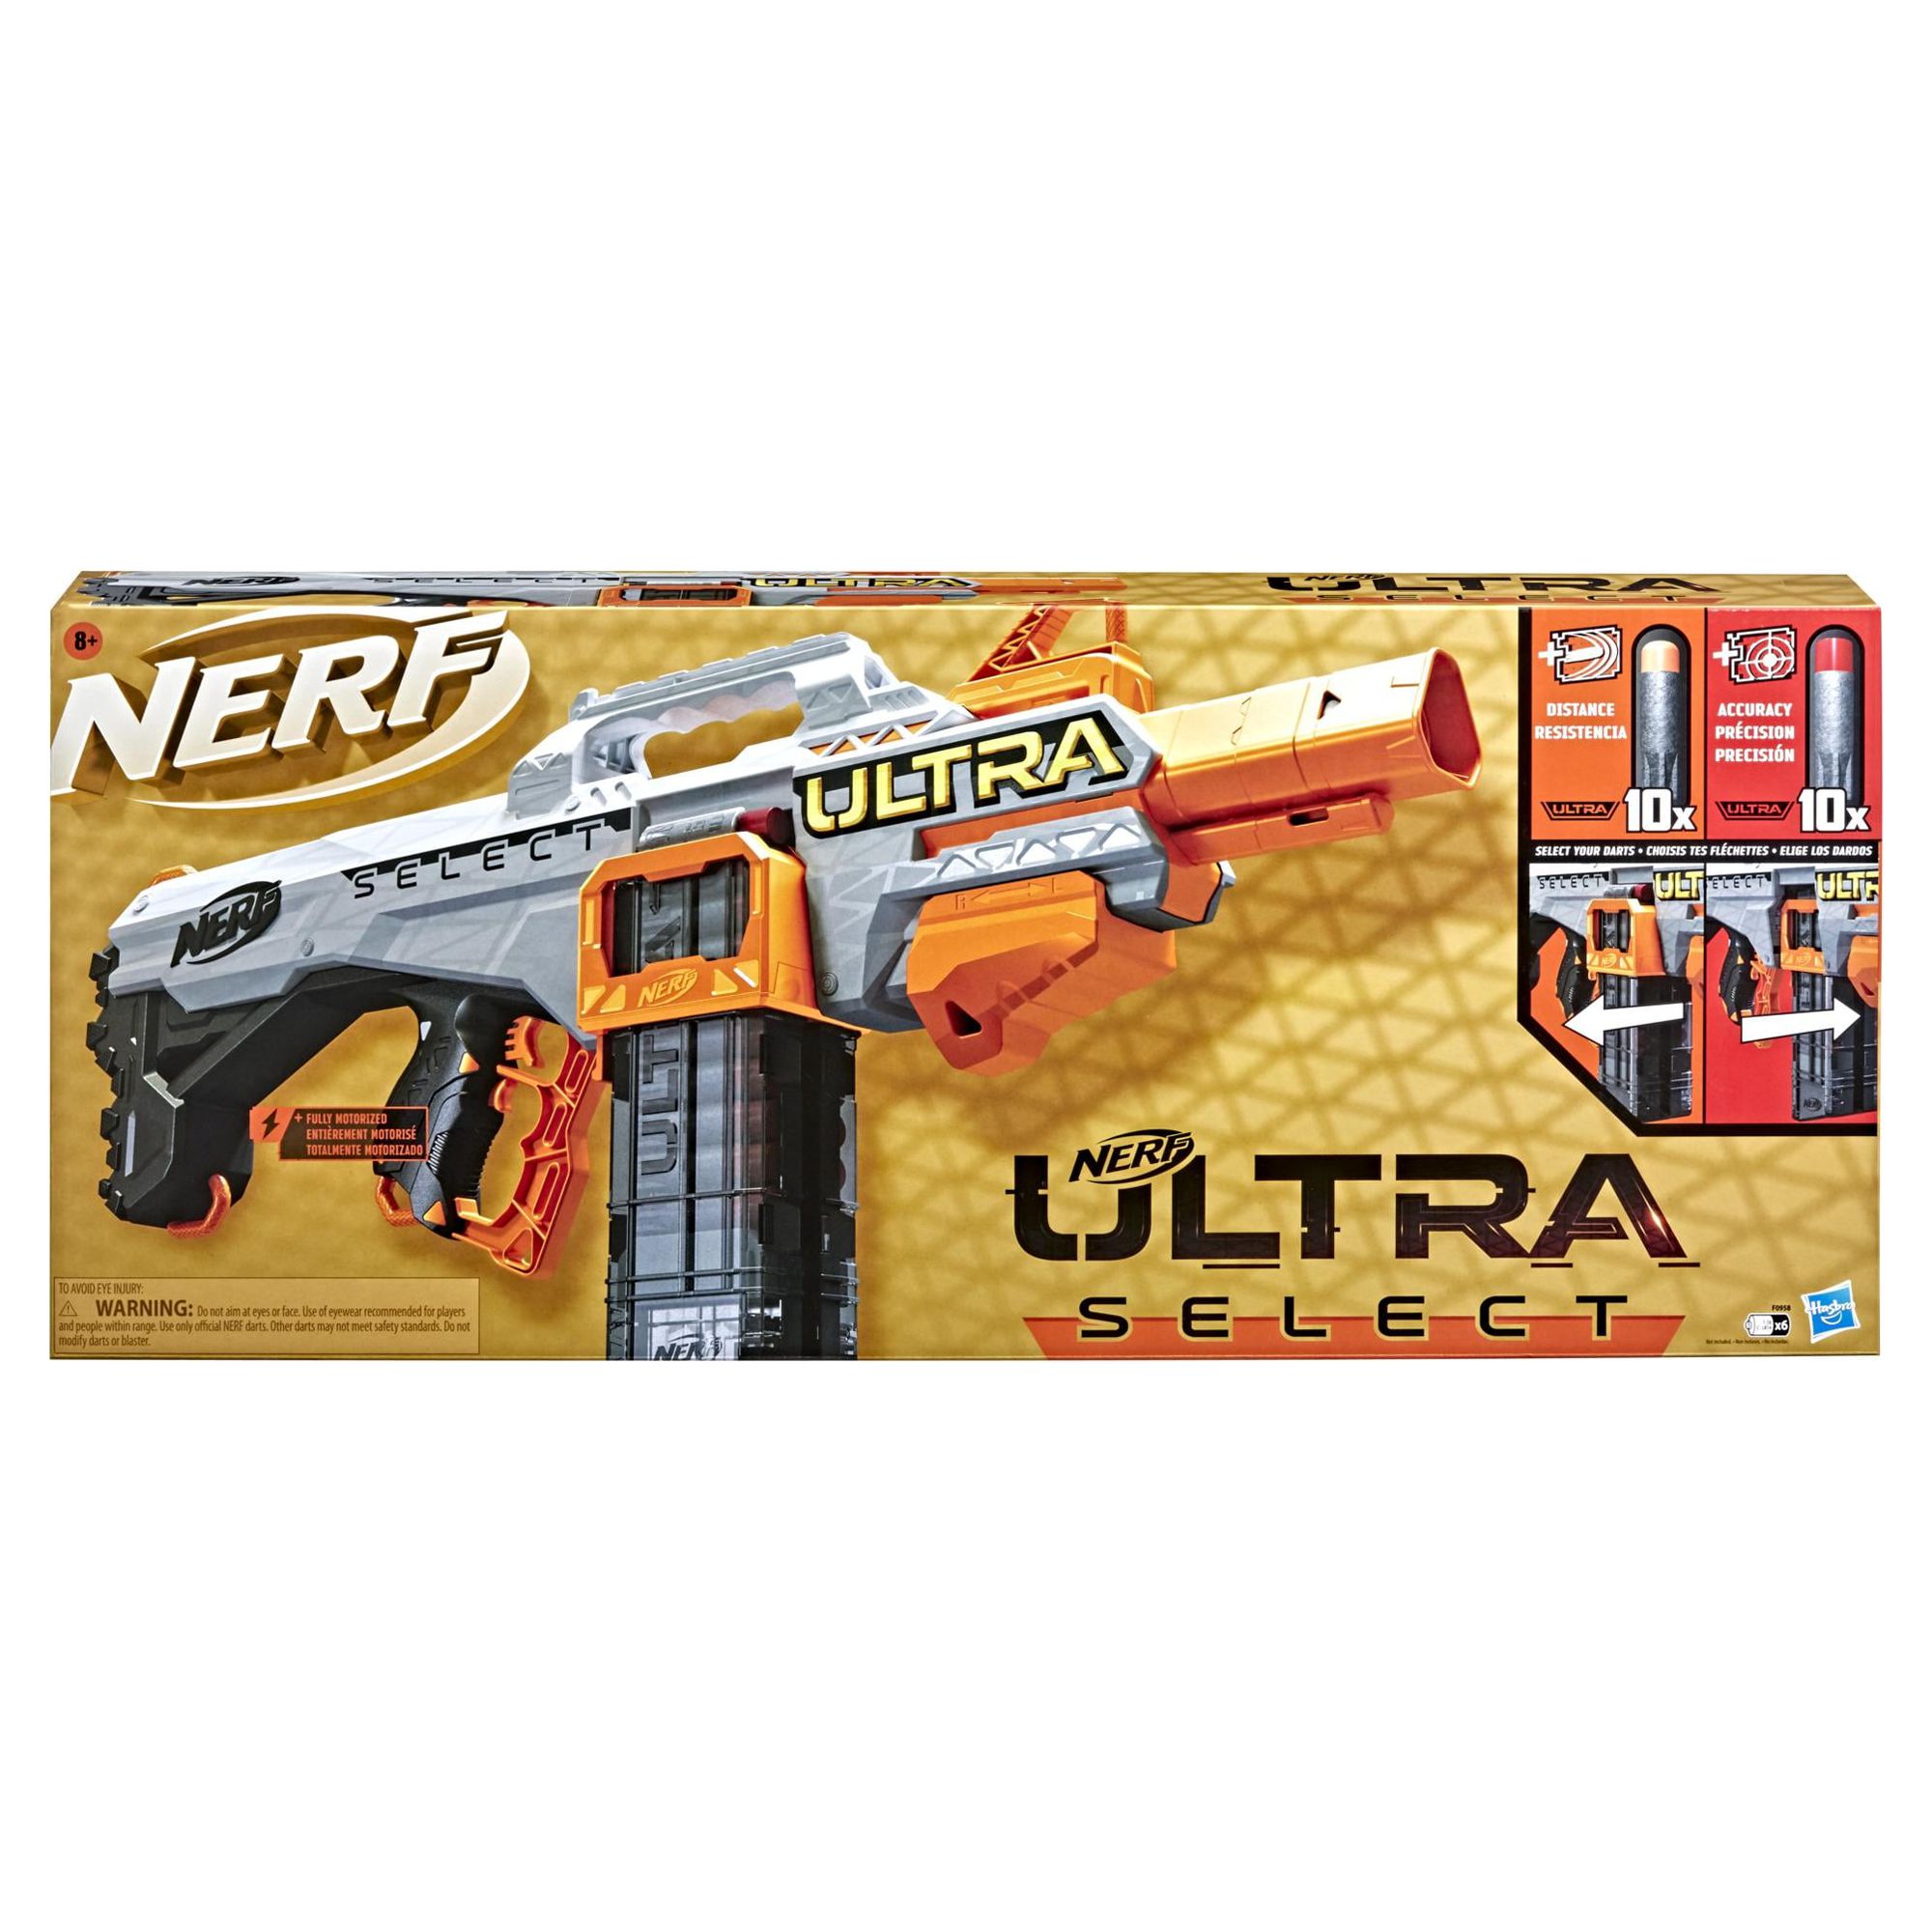 Nerf Ultra Select Fully Motorized Blaster, Fire 2 Ways, Includes Clips and Darts, Compatible Only with Nerf Ultra Darts - image 3 of 5